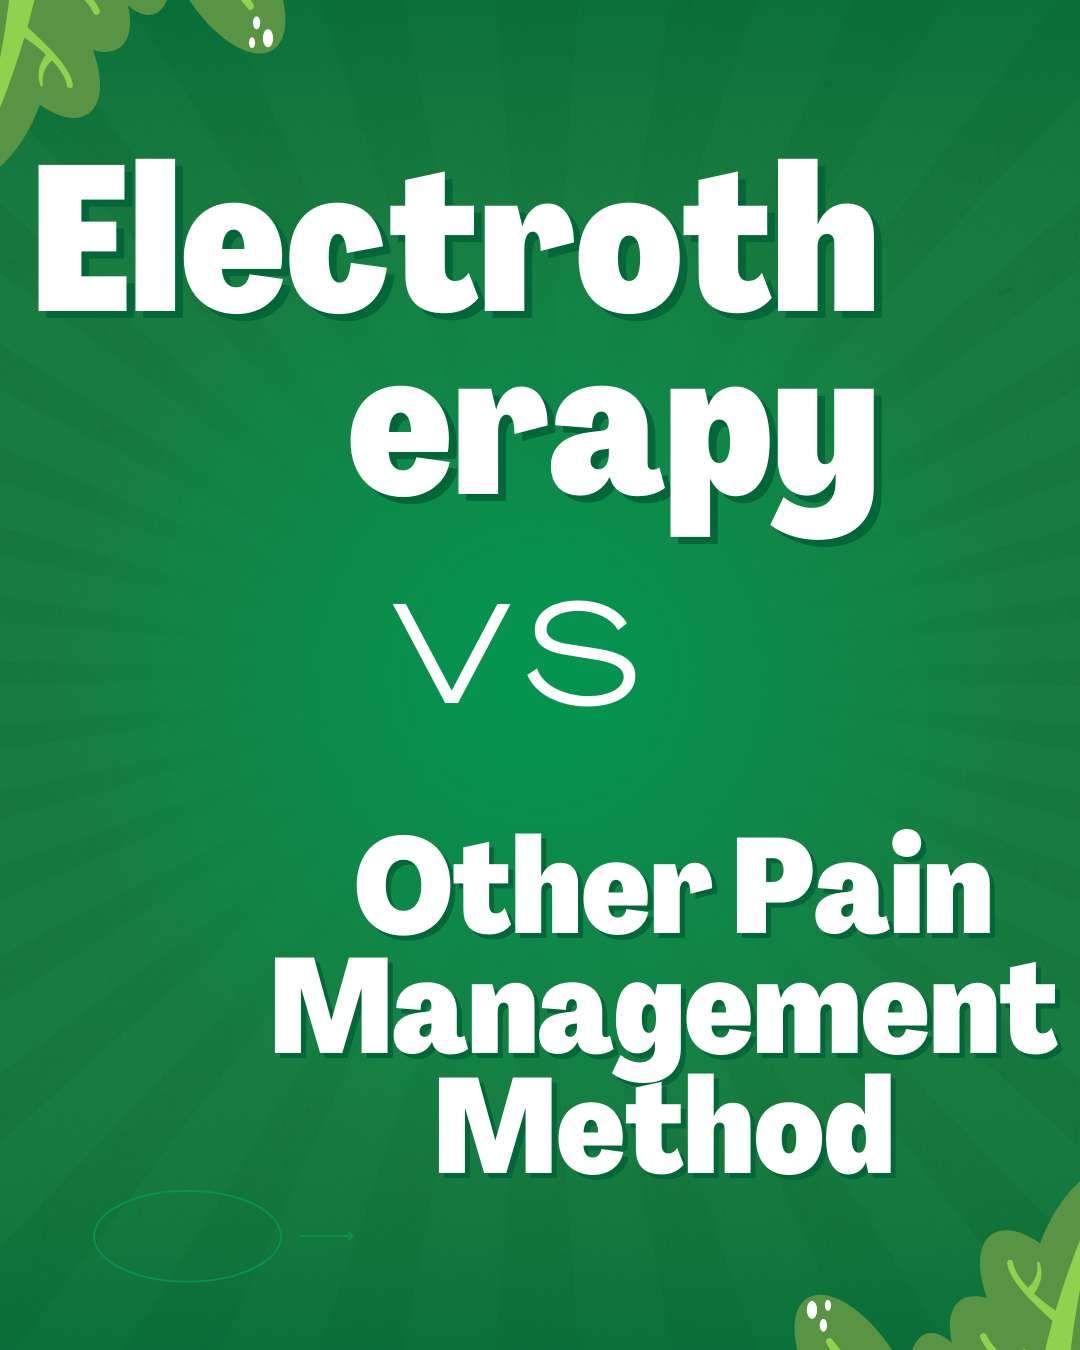 Electrotherapy vs. Other Pain Management Methods